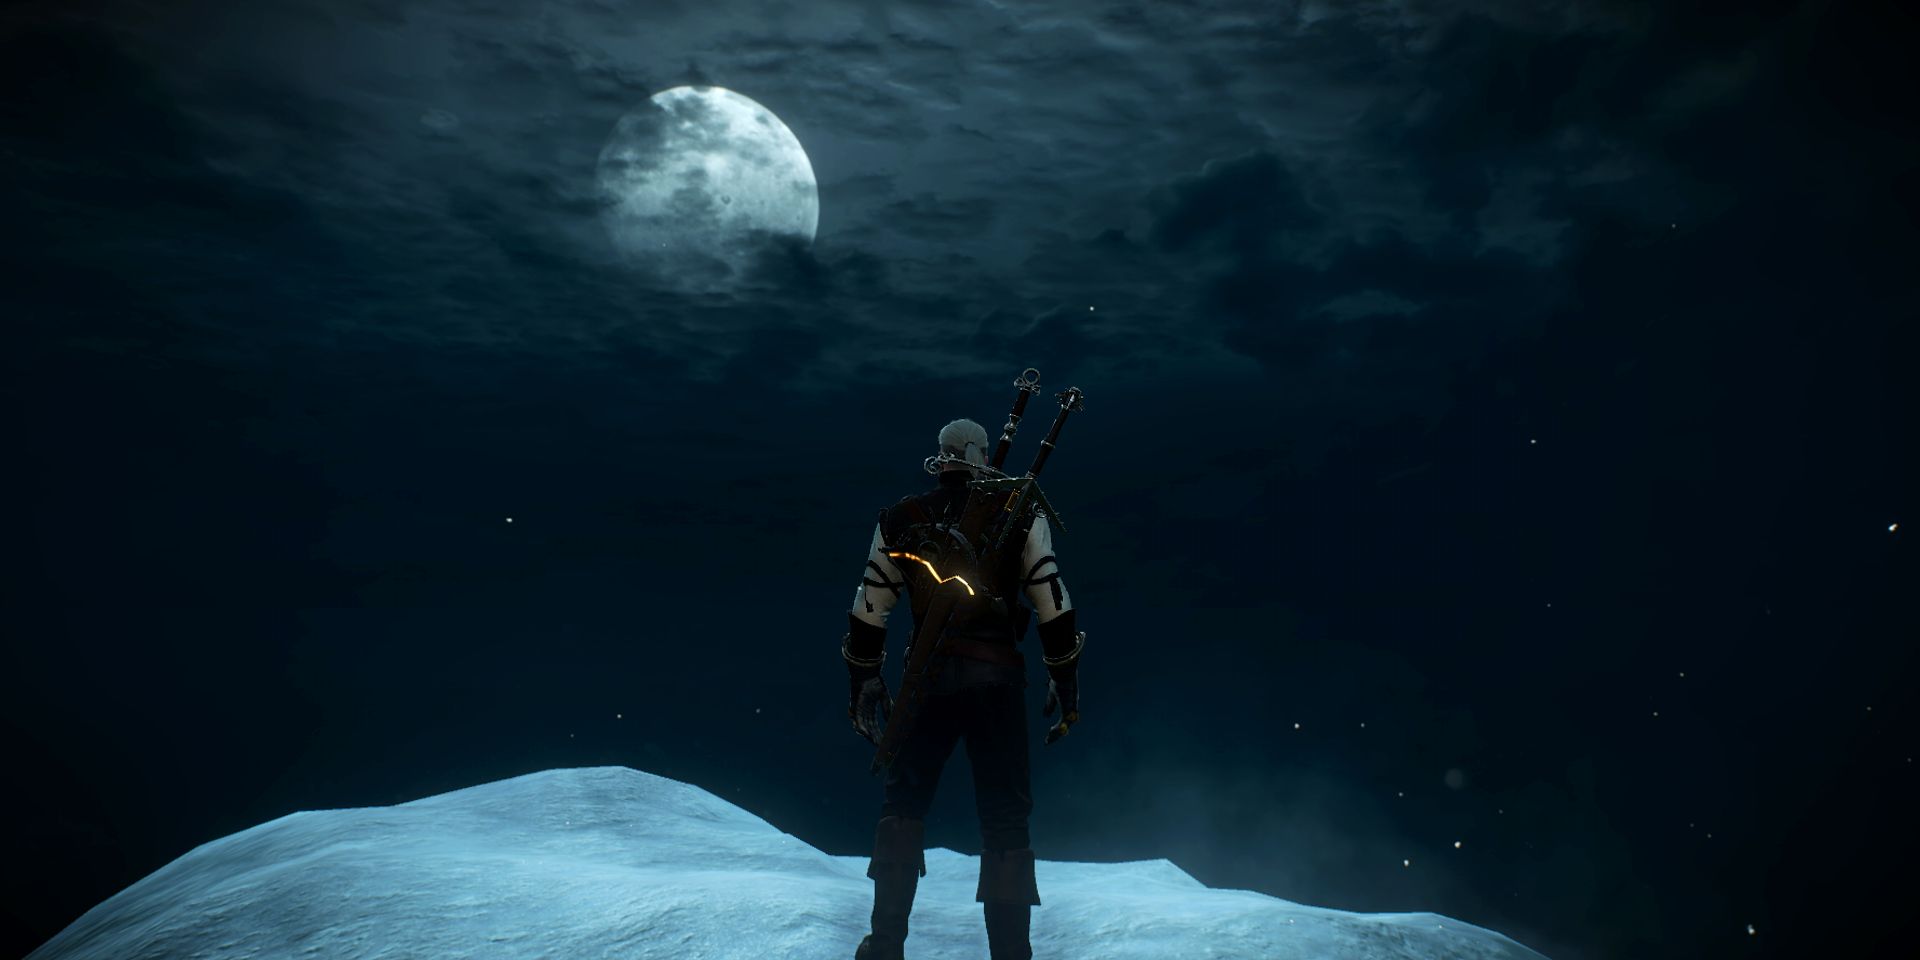 geralt staring at the night sky.